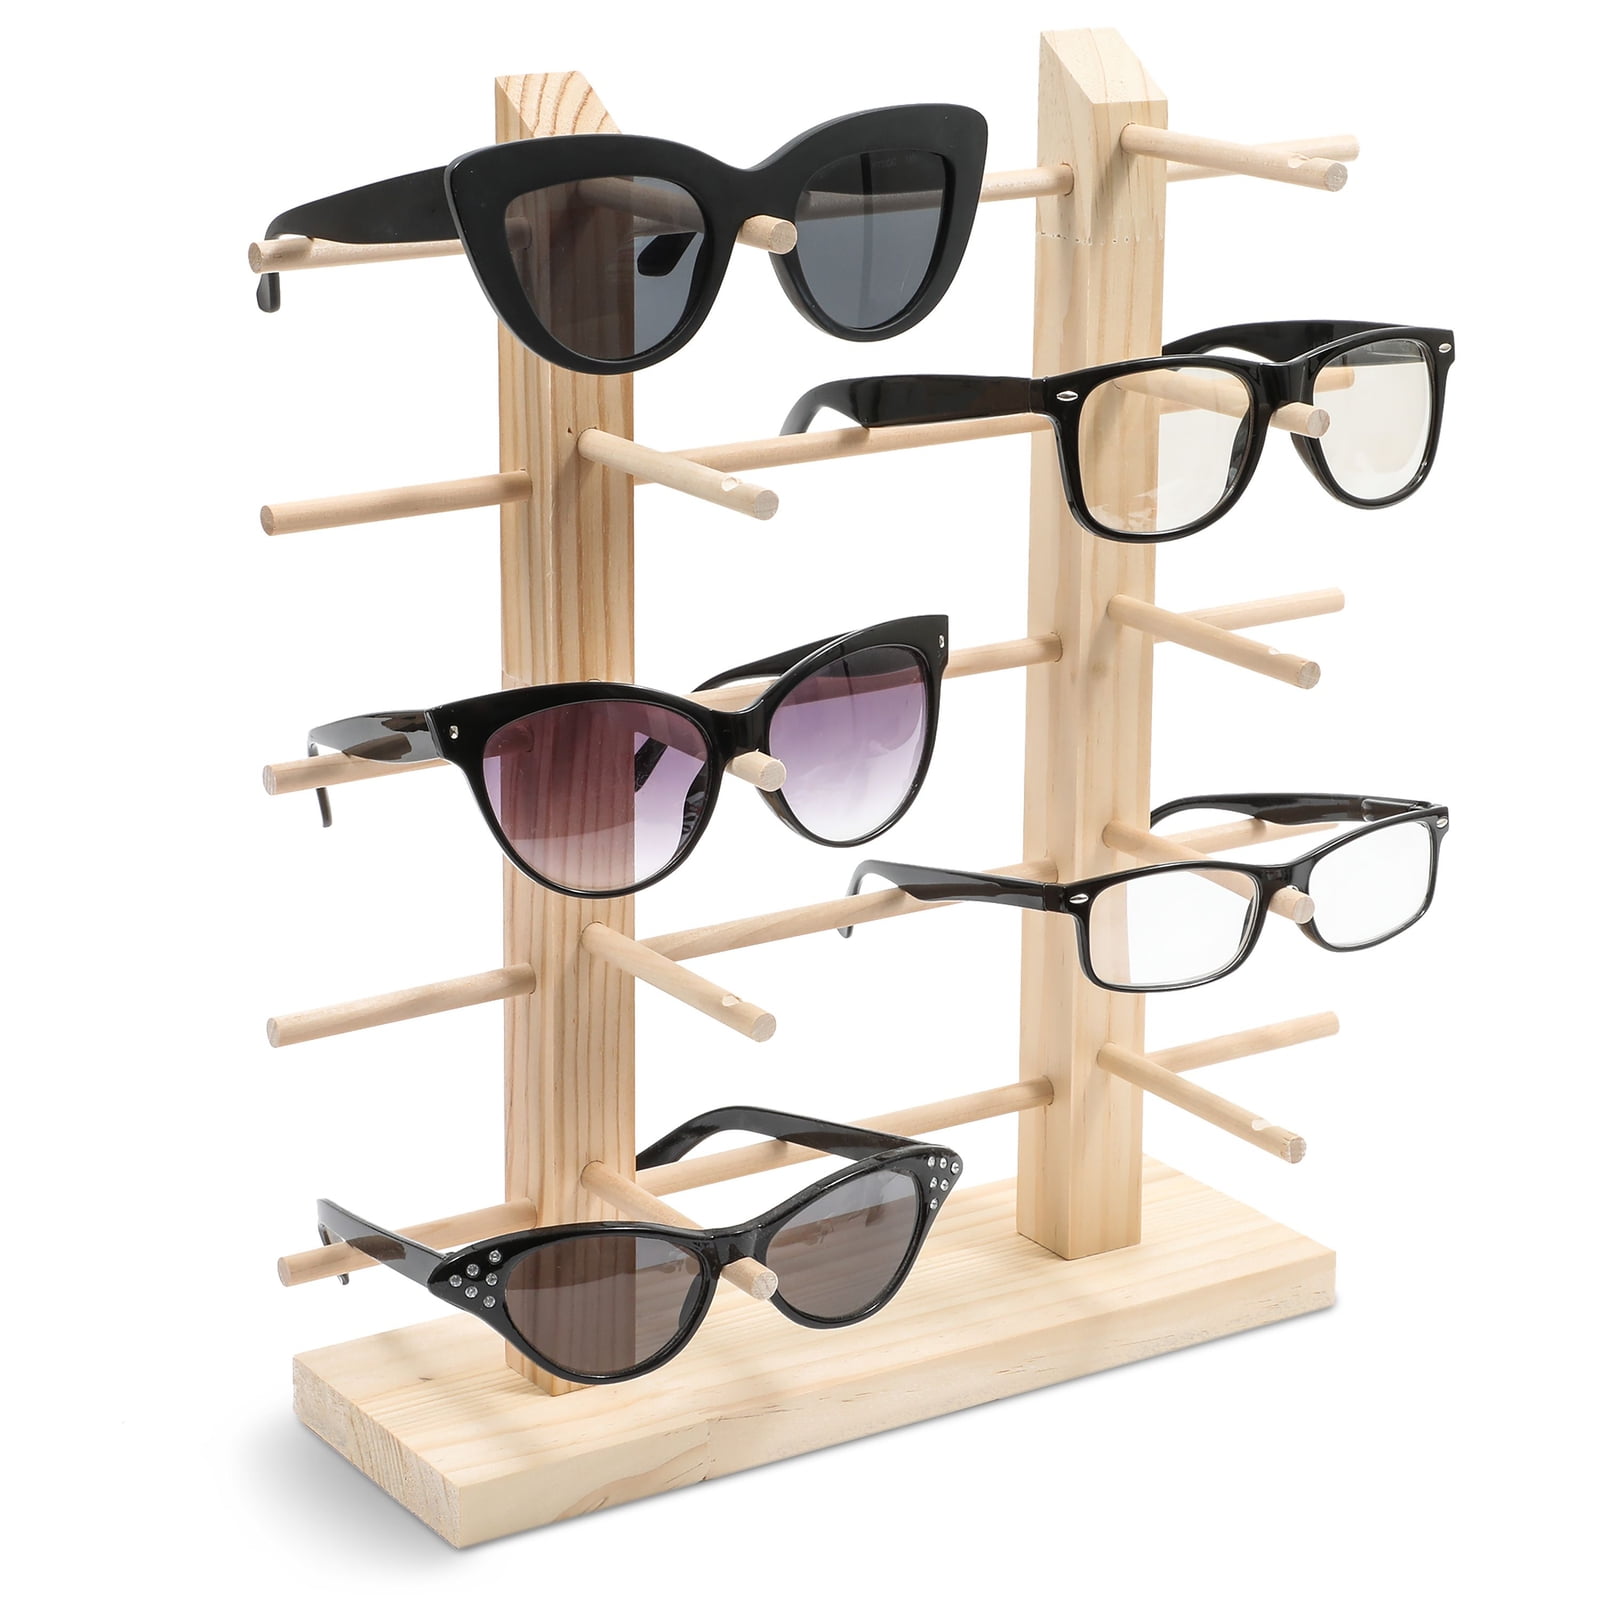 Details about   5 Layers Acrylic Clear Eyeglasses Sunglasses Glasses Display Stand Rack Holder 